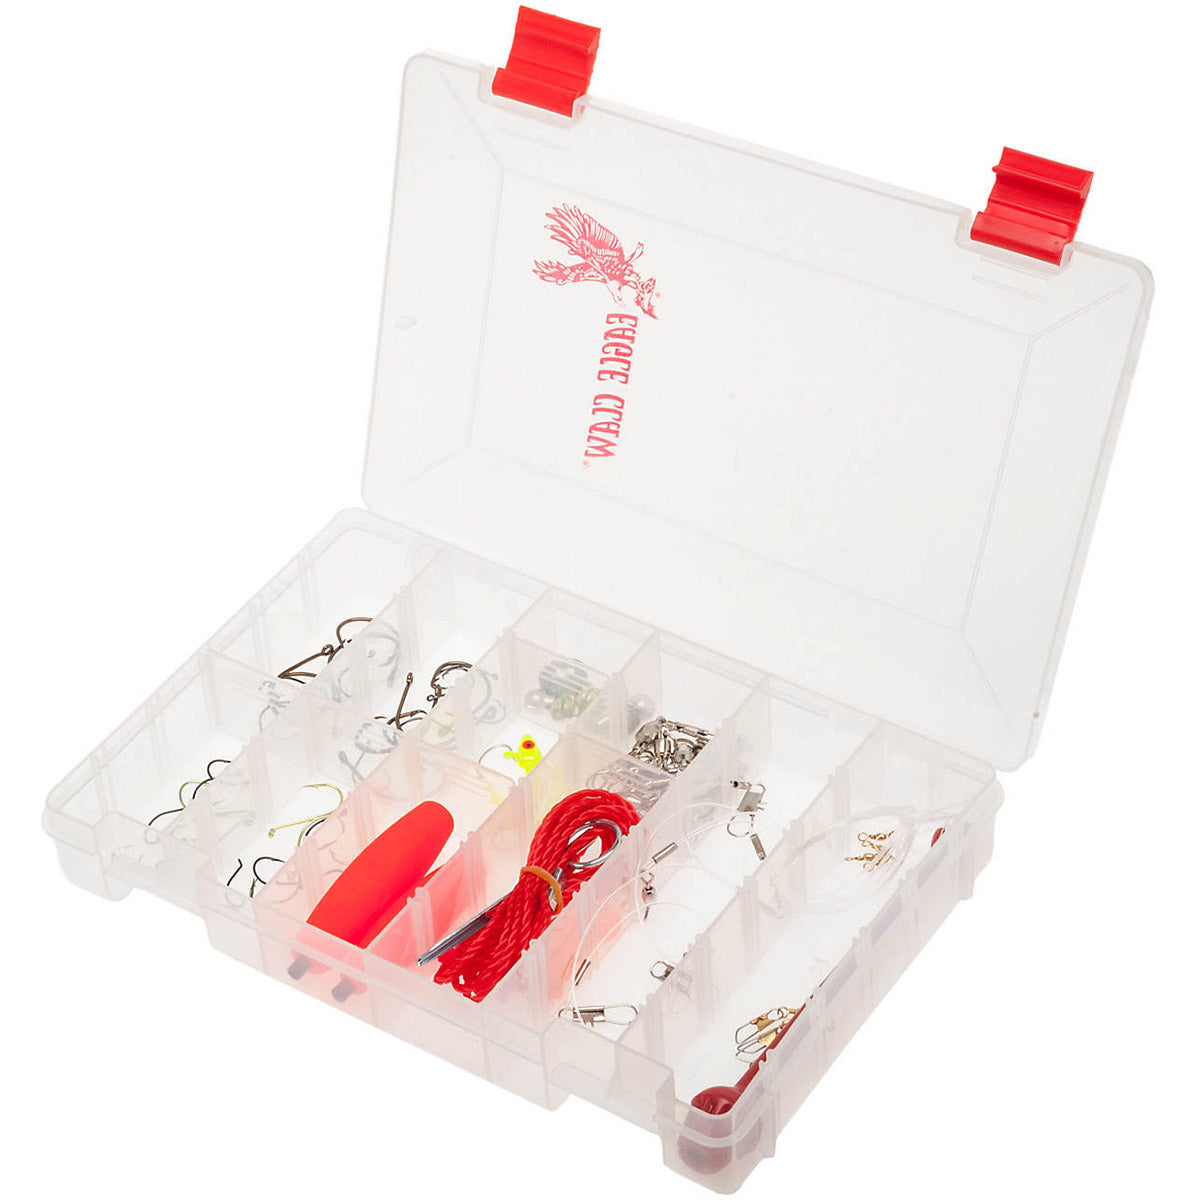 Eagle Claw South Coastal Saltwater Tackle Kit